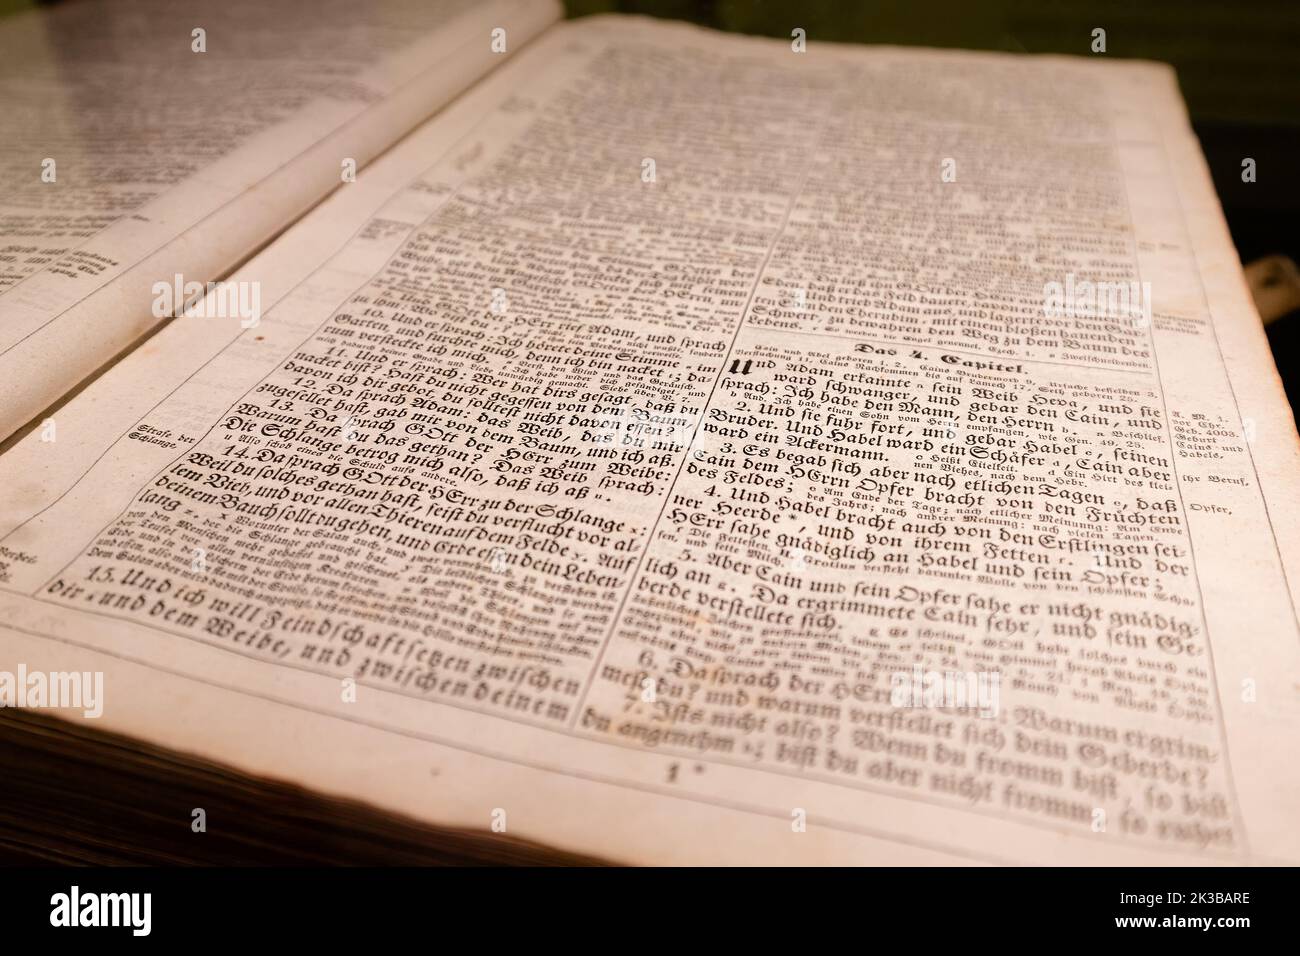 22 July 2022, Neanderthal museum, Germany: An ancient copy of the book of the Bible with German text Stock Photo